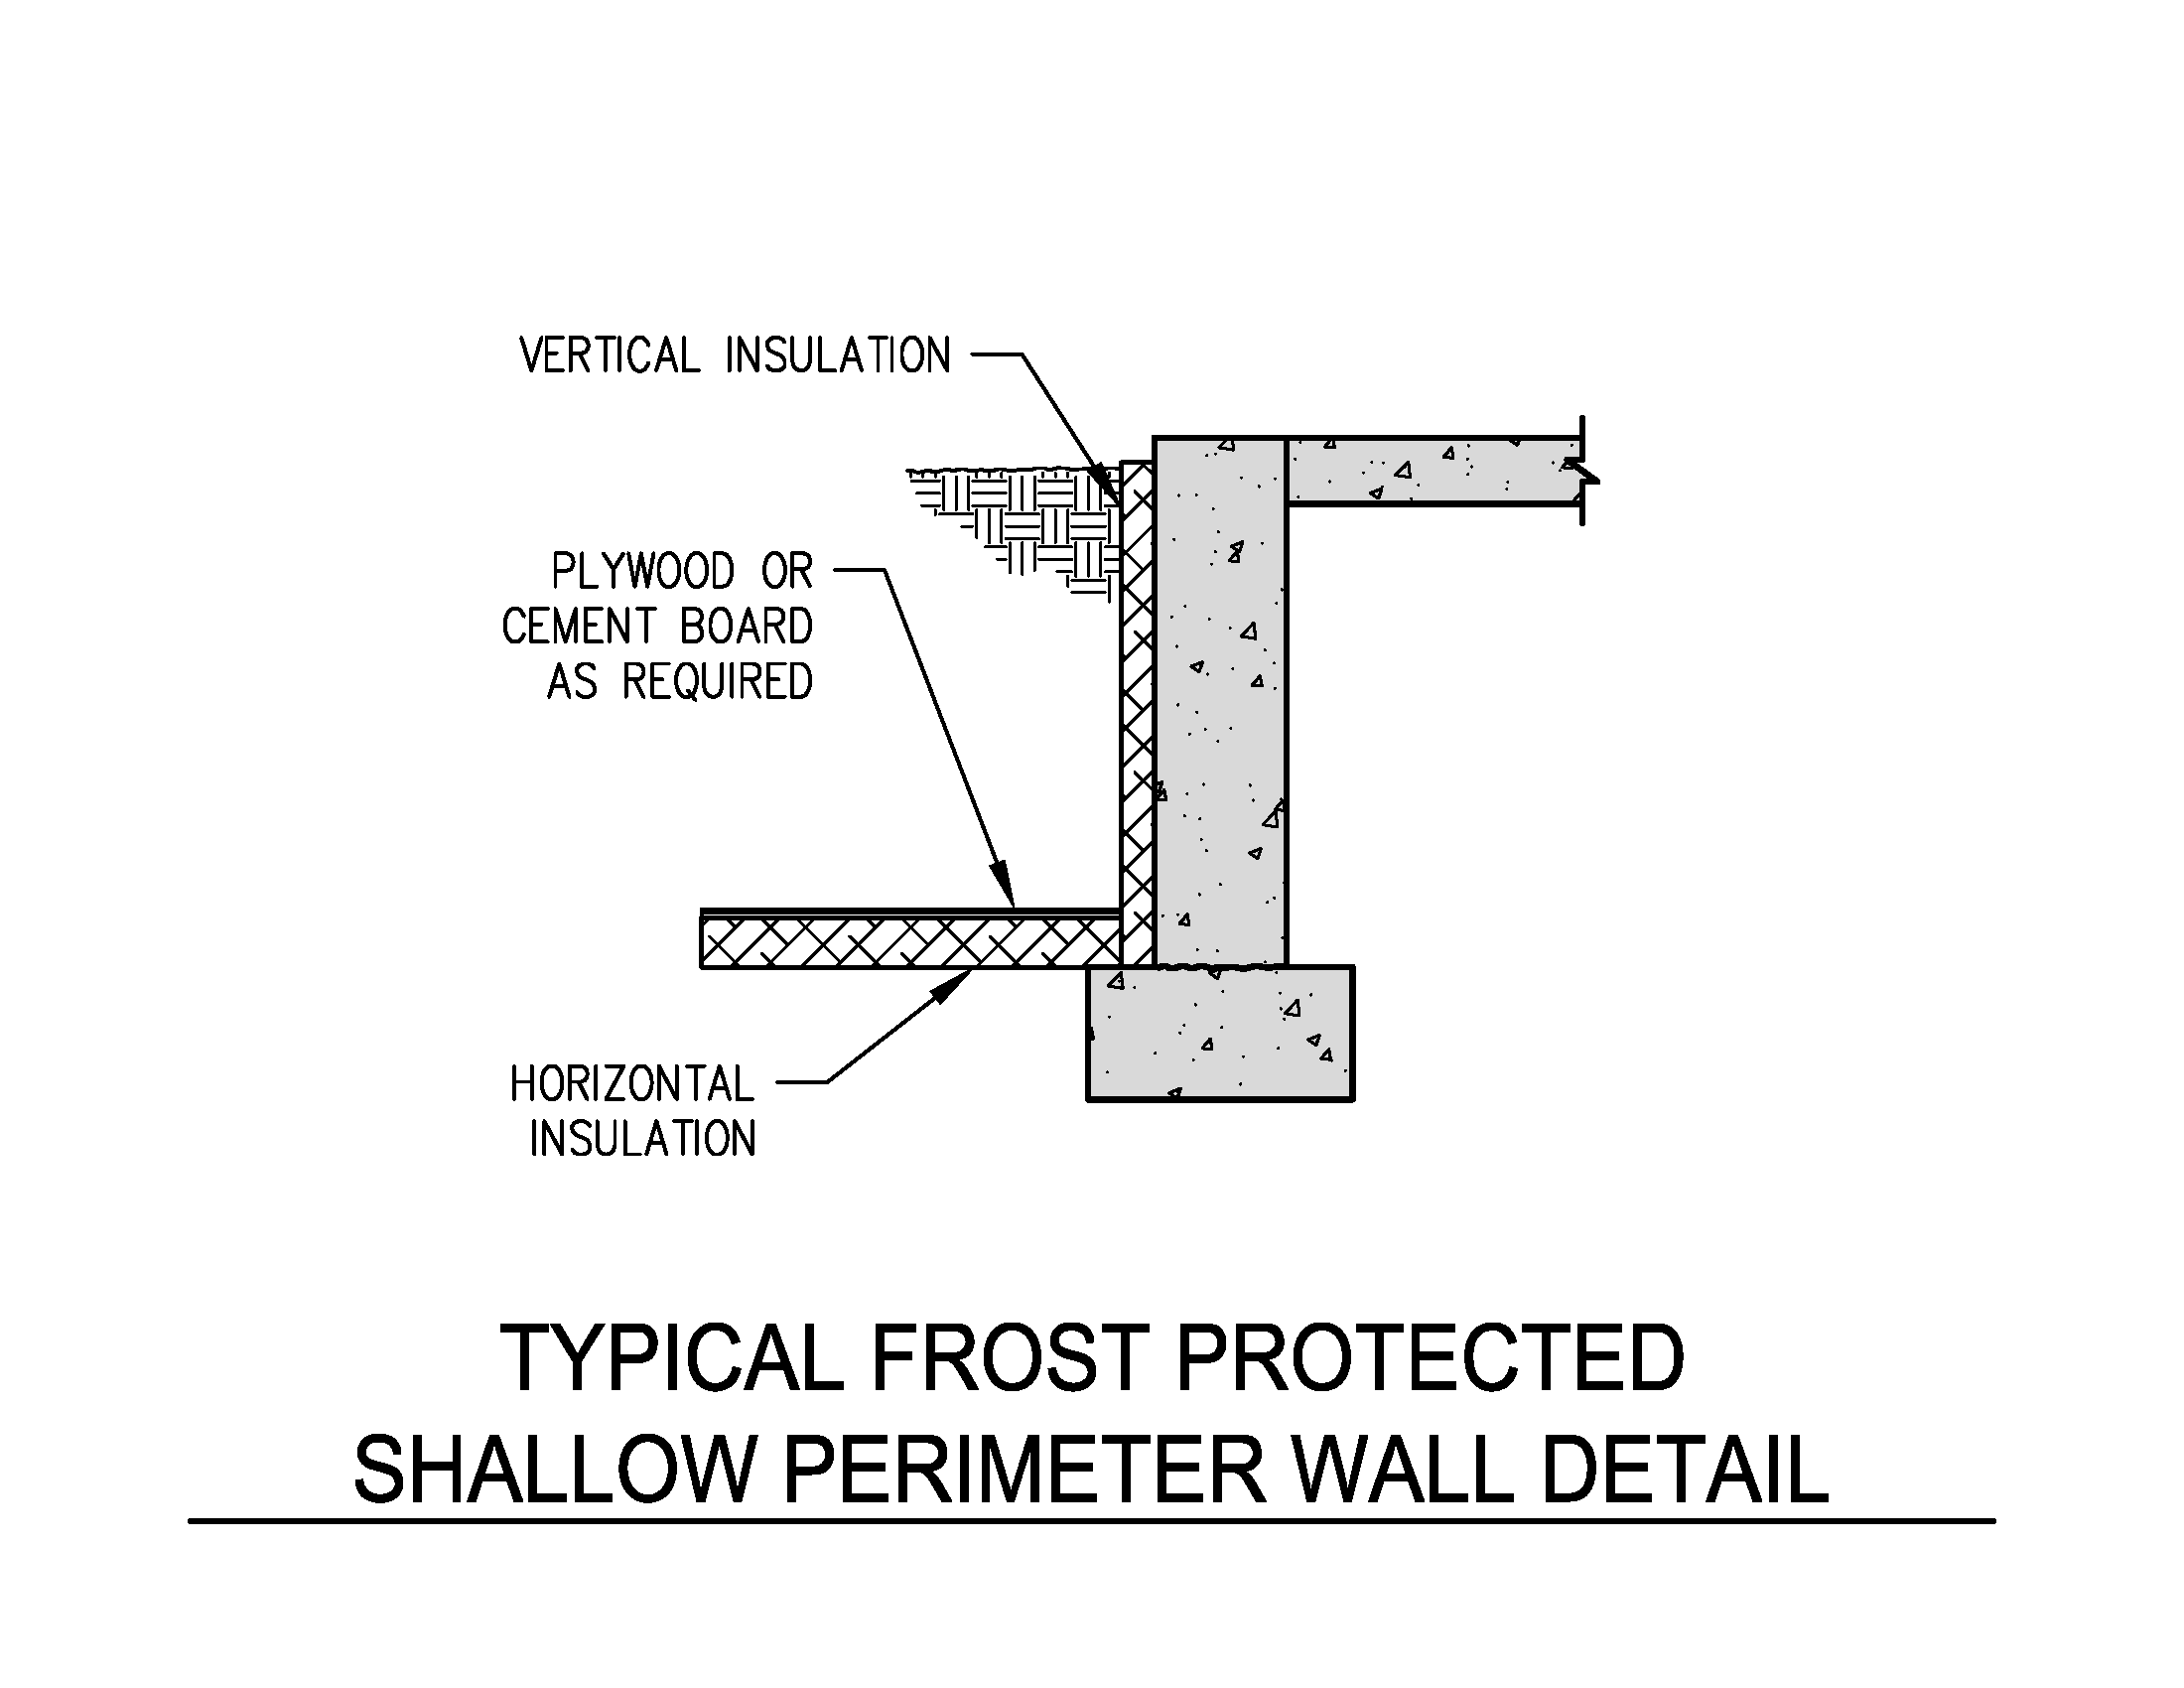 Typical Frost Protected Perimeter Wall Detail